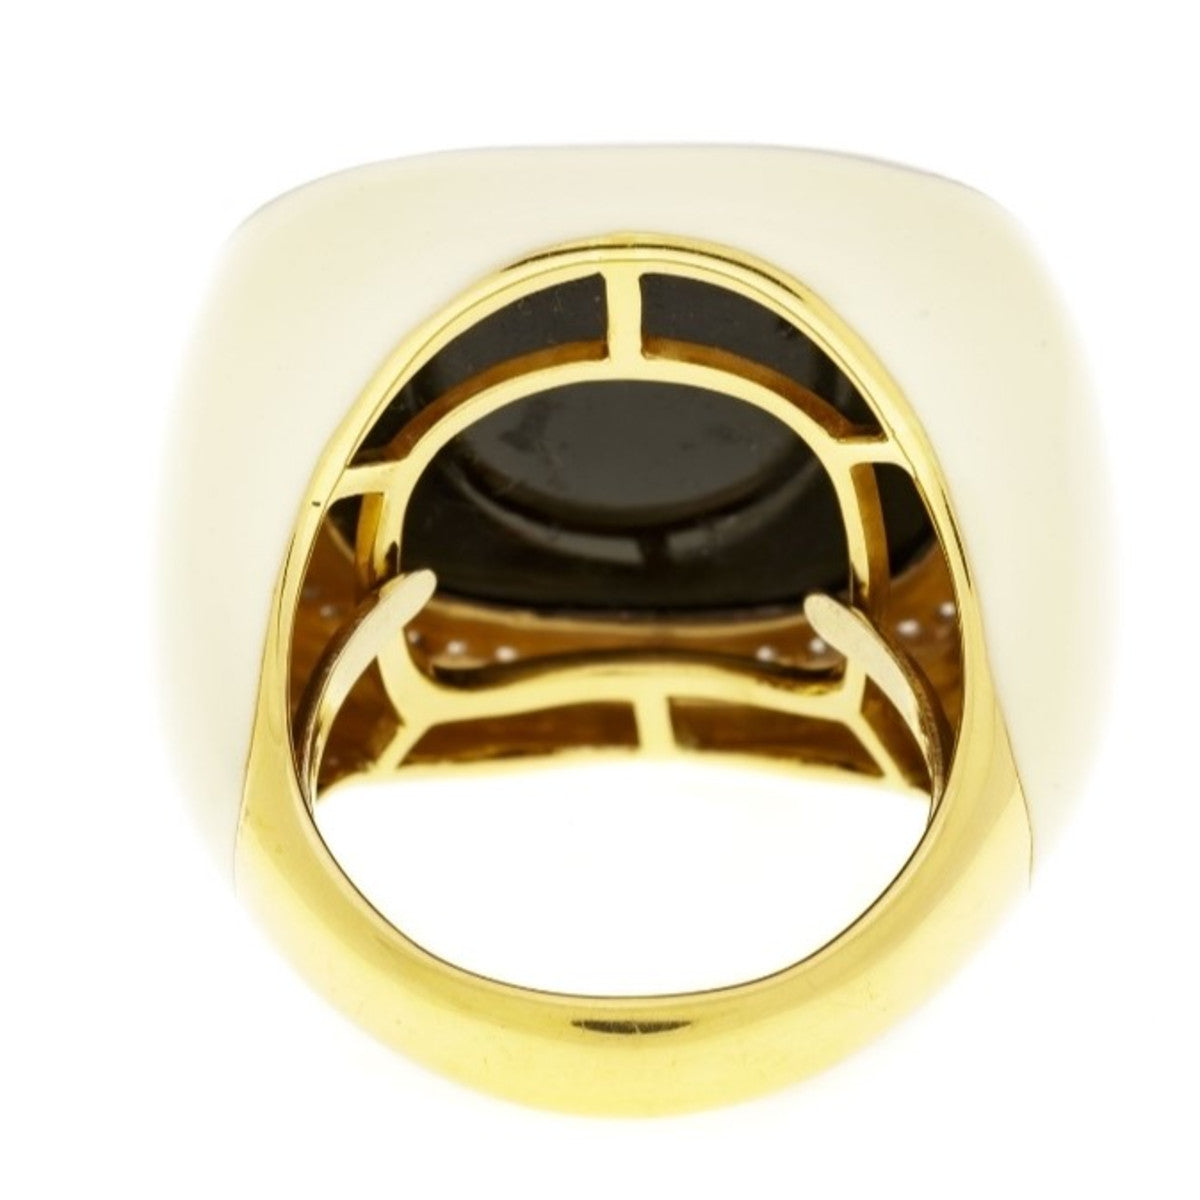 Post-1980s 18KT Yellow Gold Onyx, Diamond & Lacquer Ring back view